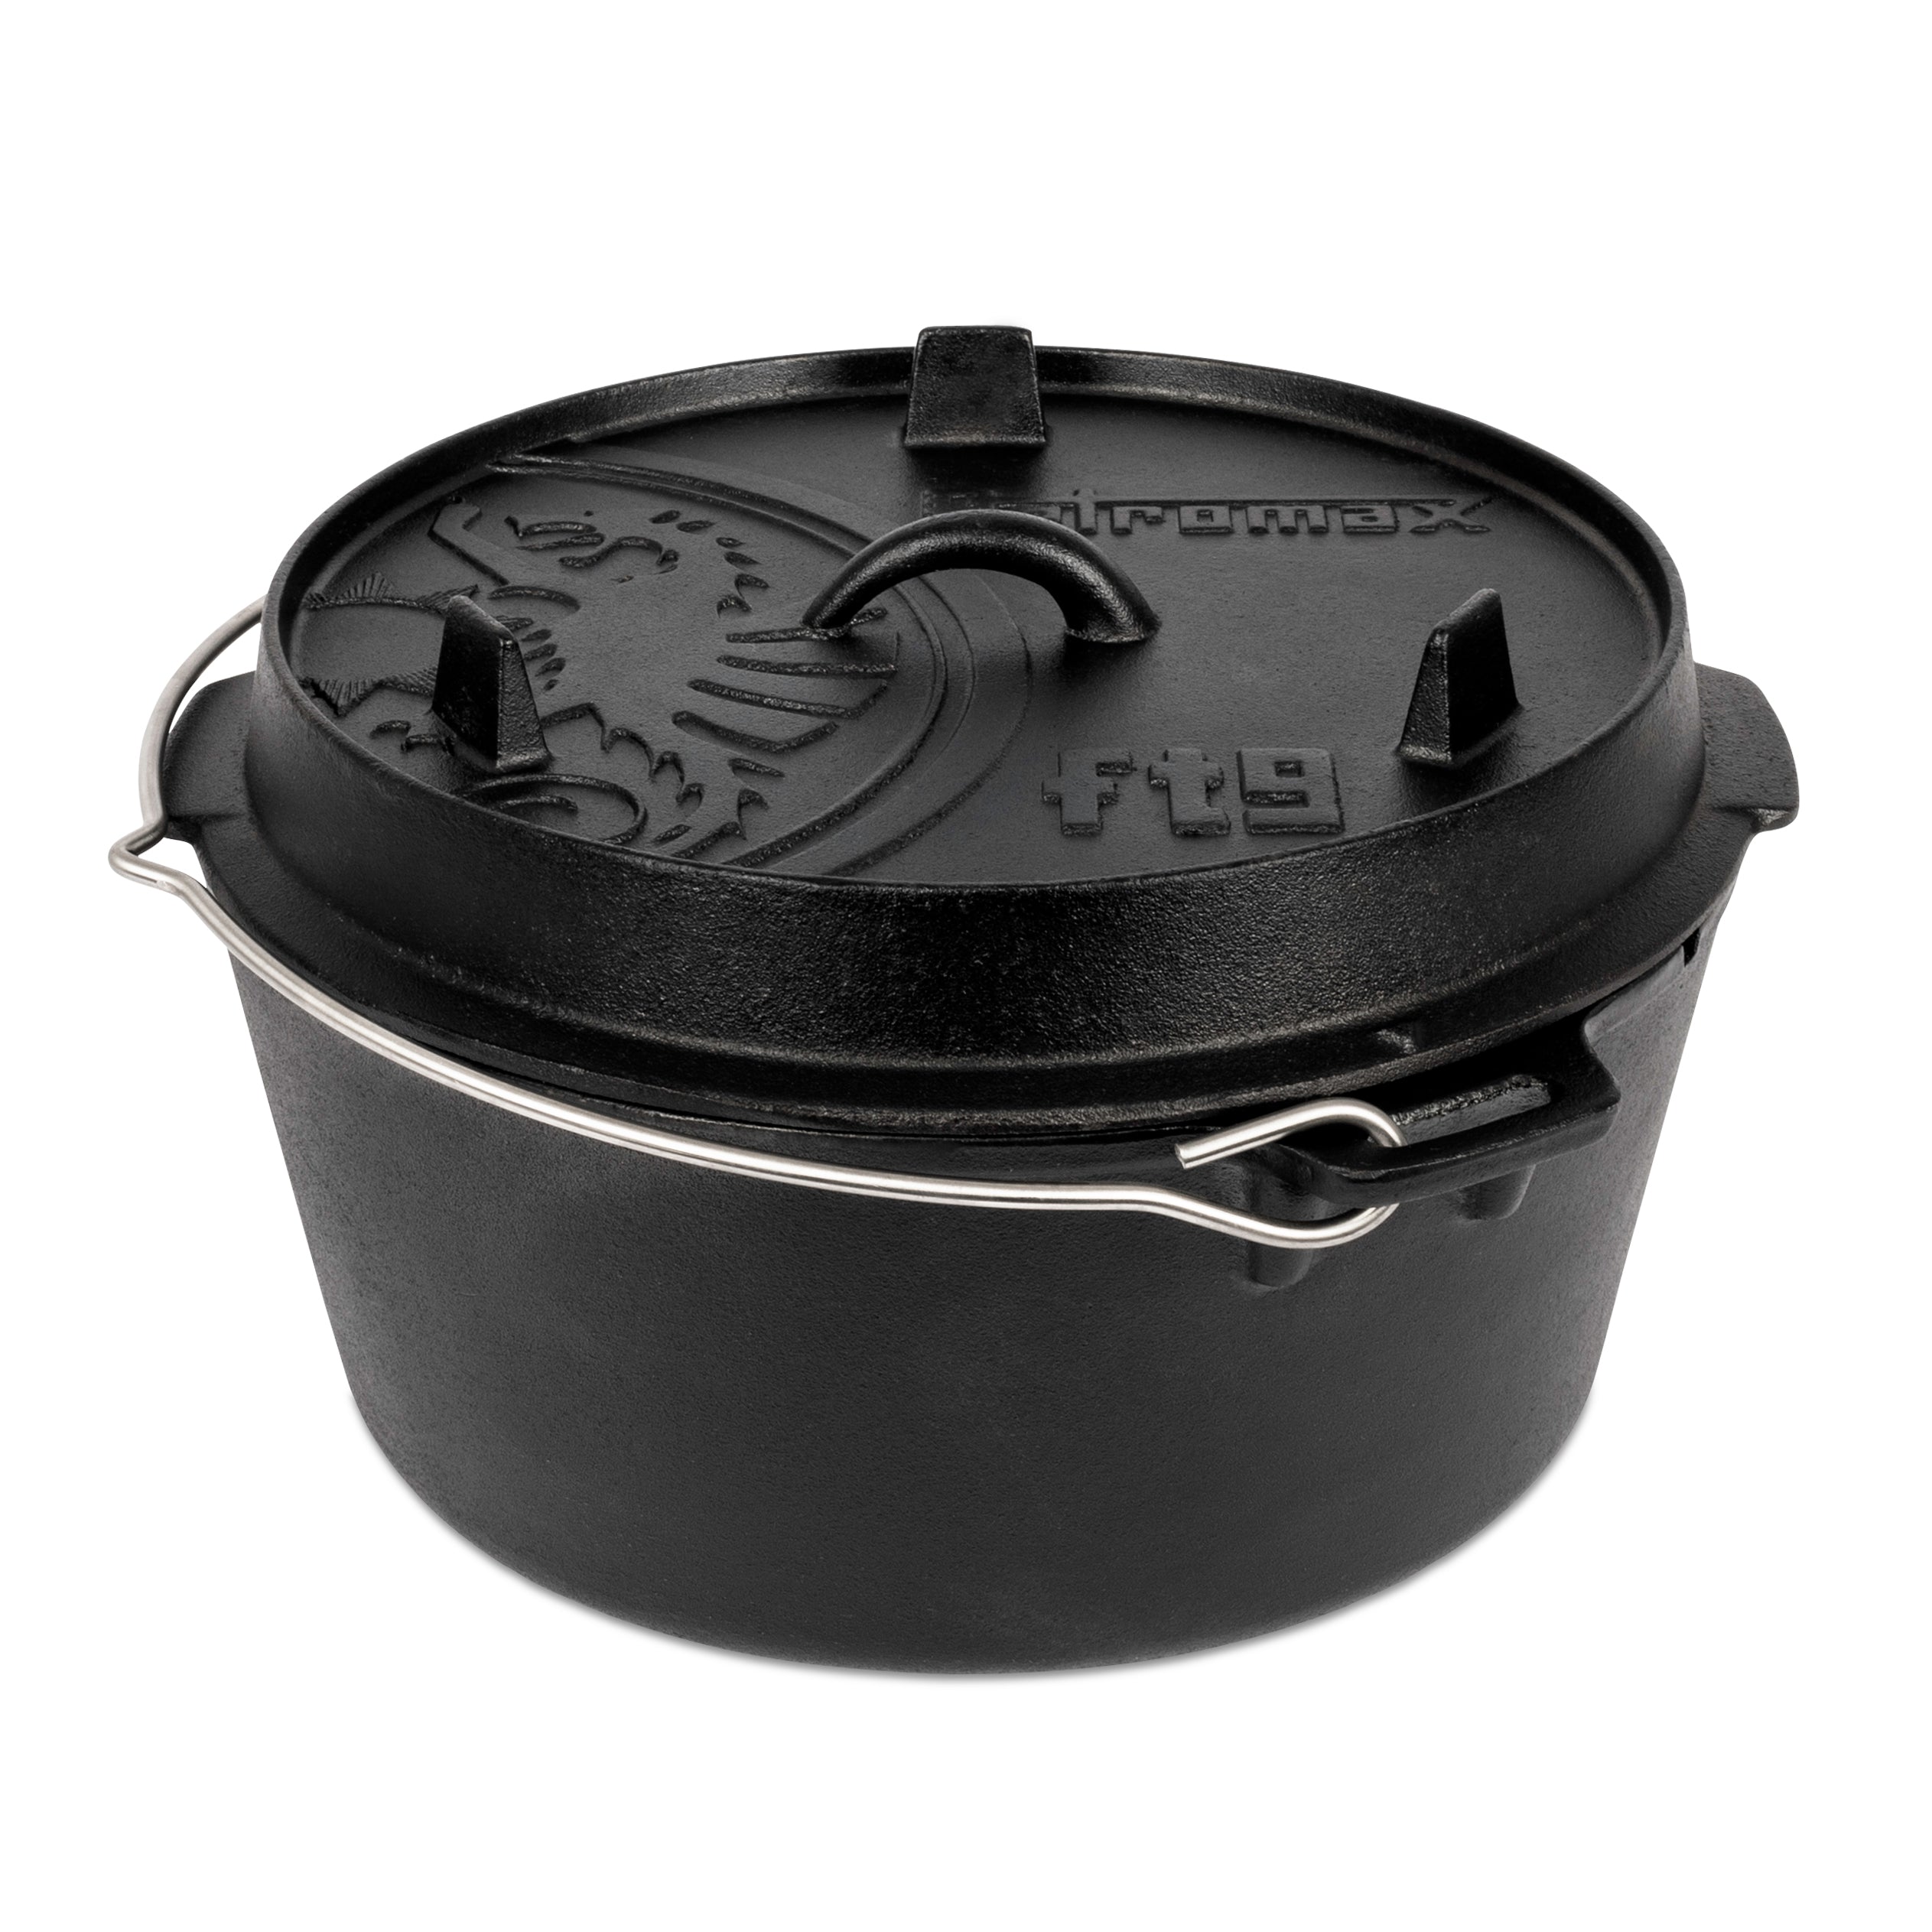 Cast Iron 7.5L Dutch Oven with a Flat Bottom - Petromax - ft9-t